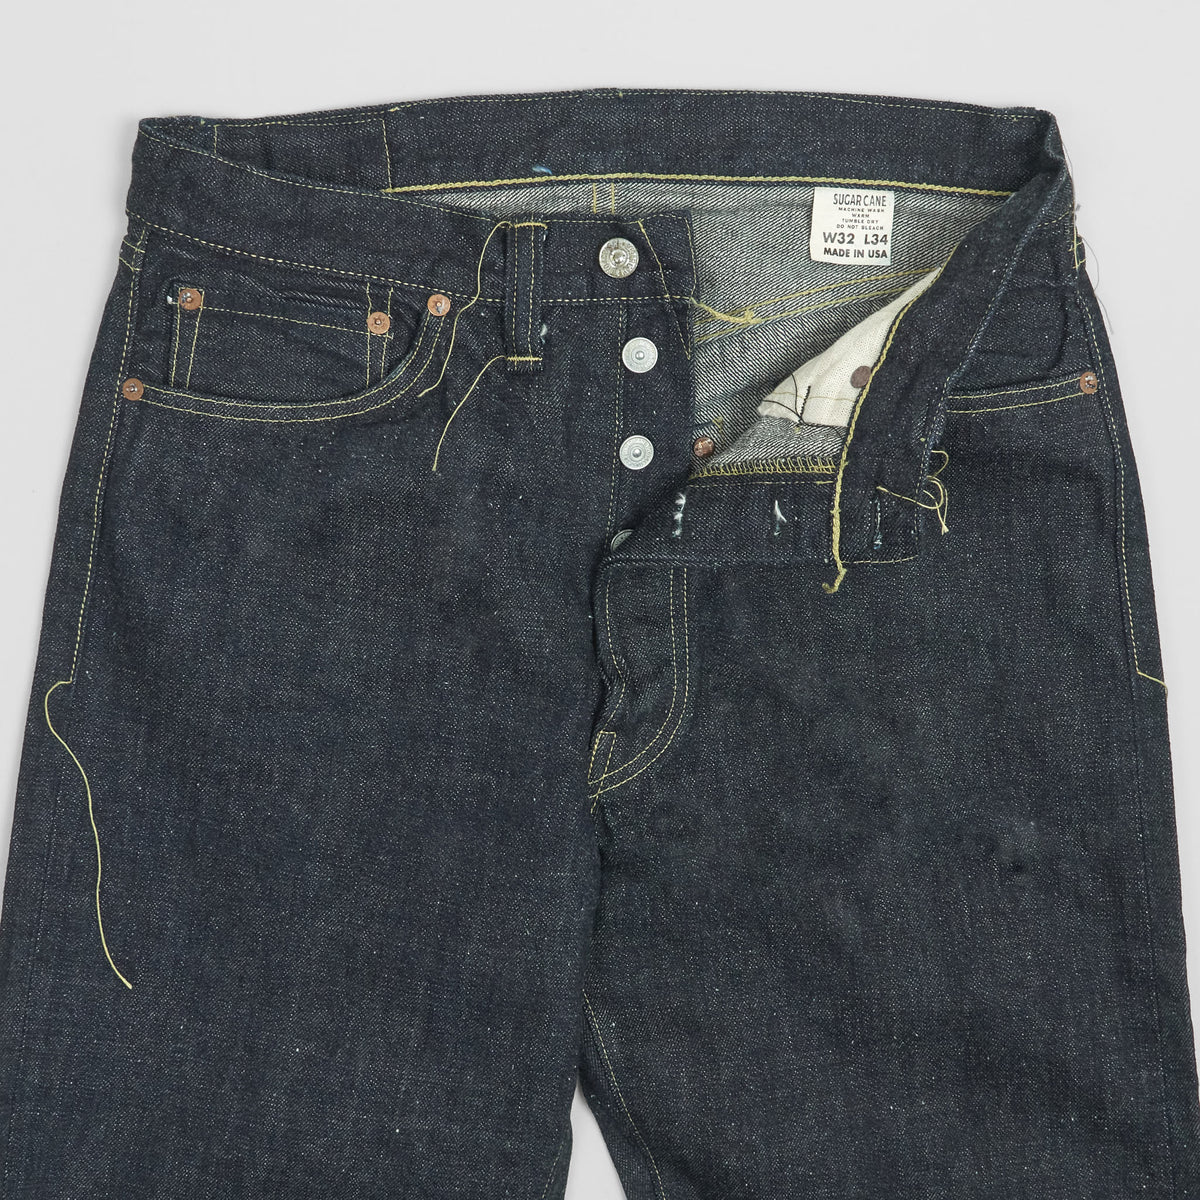 Sugar Cane Denim Jeans Made in USA 1946 Reproduction